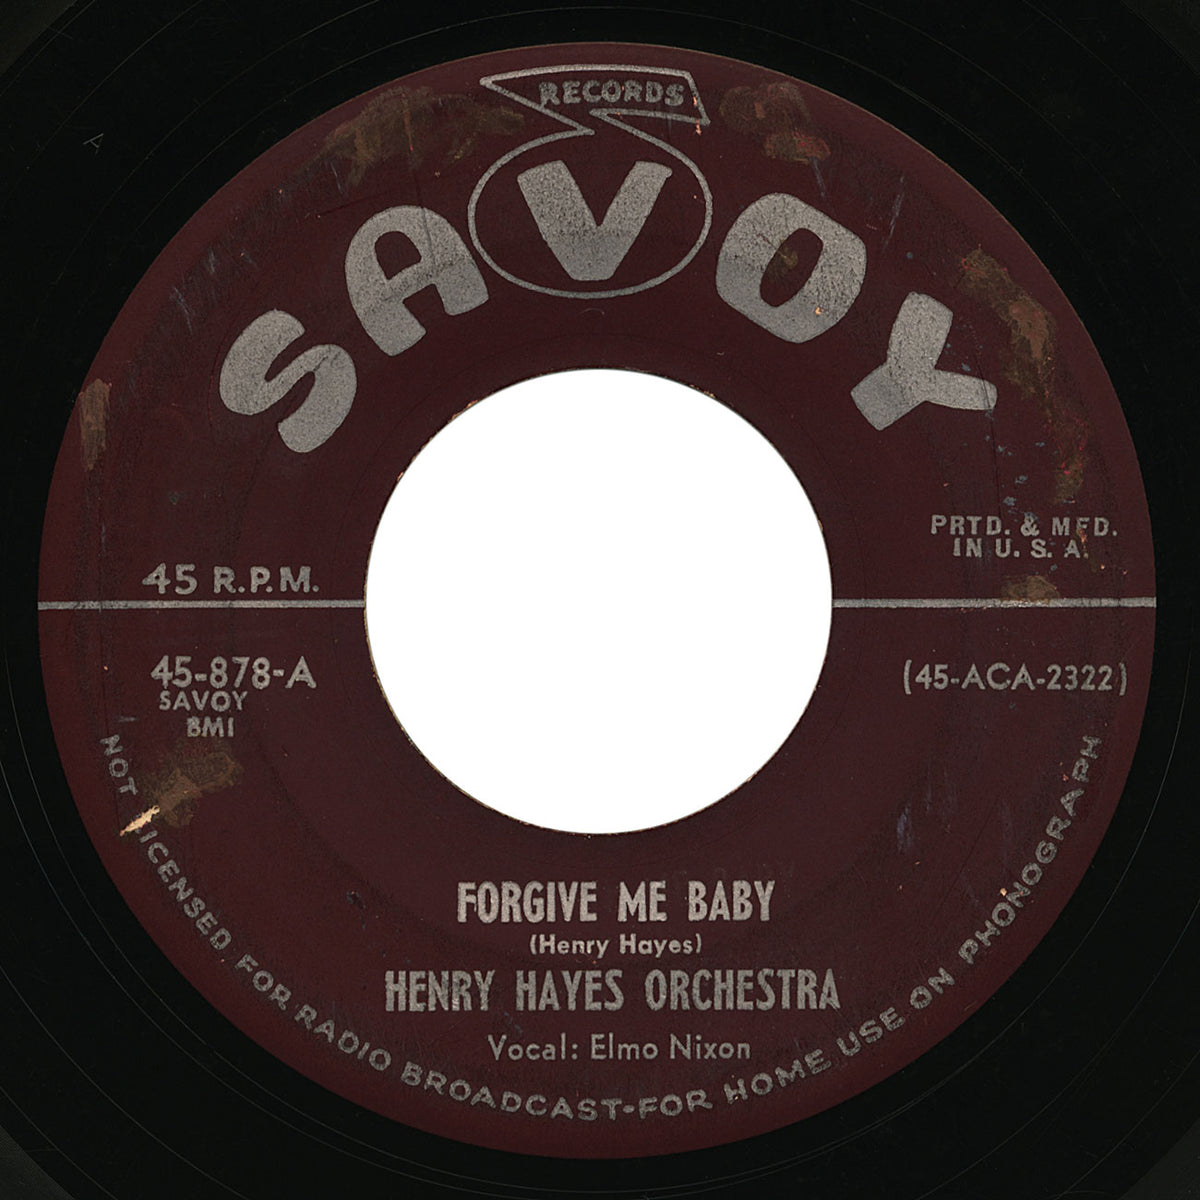 Henry Hayes Orchestra – Forgive Me Baby – Savoy